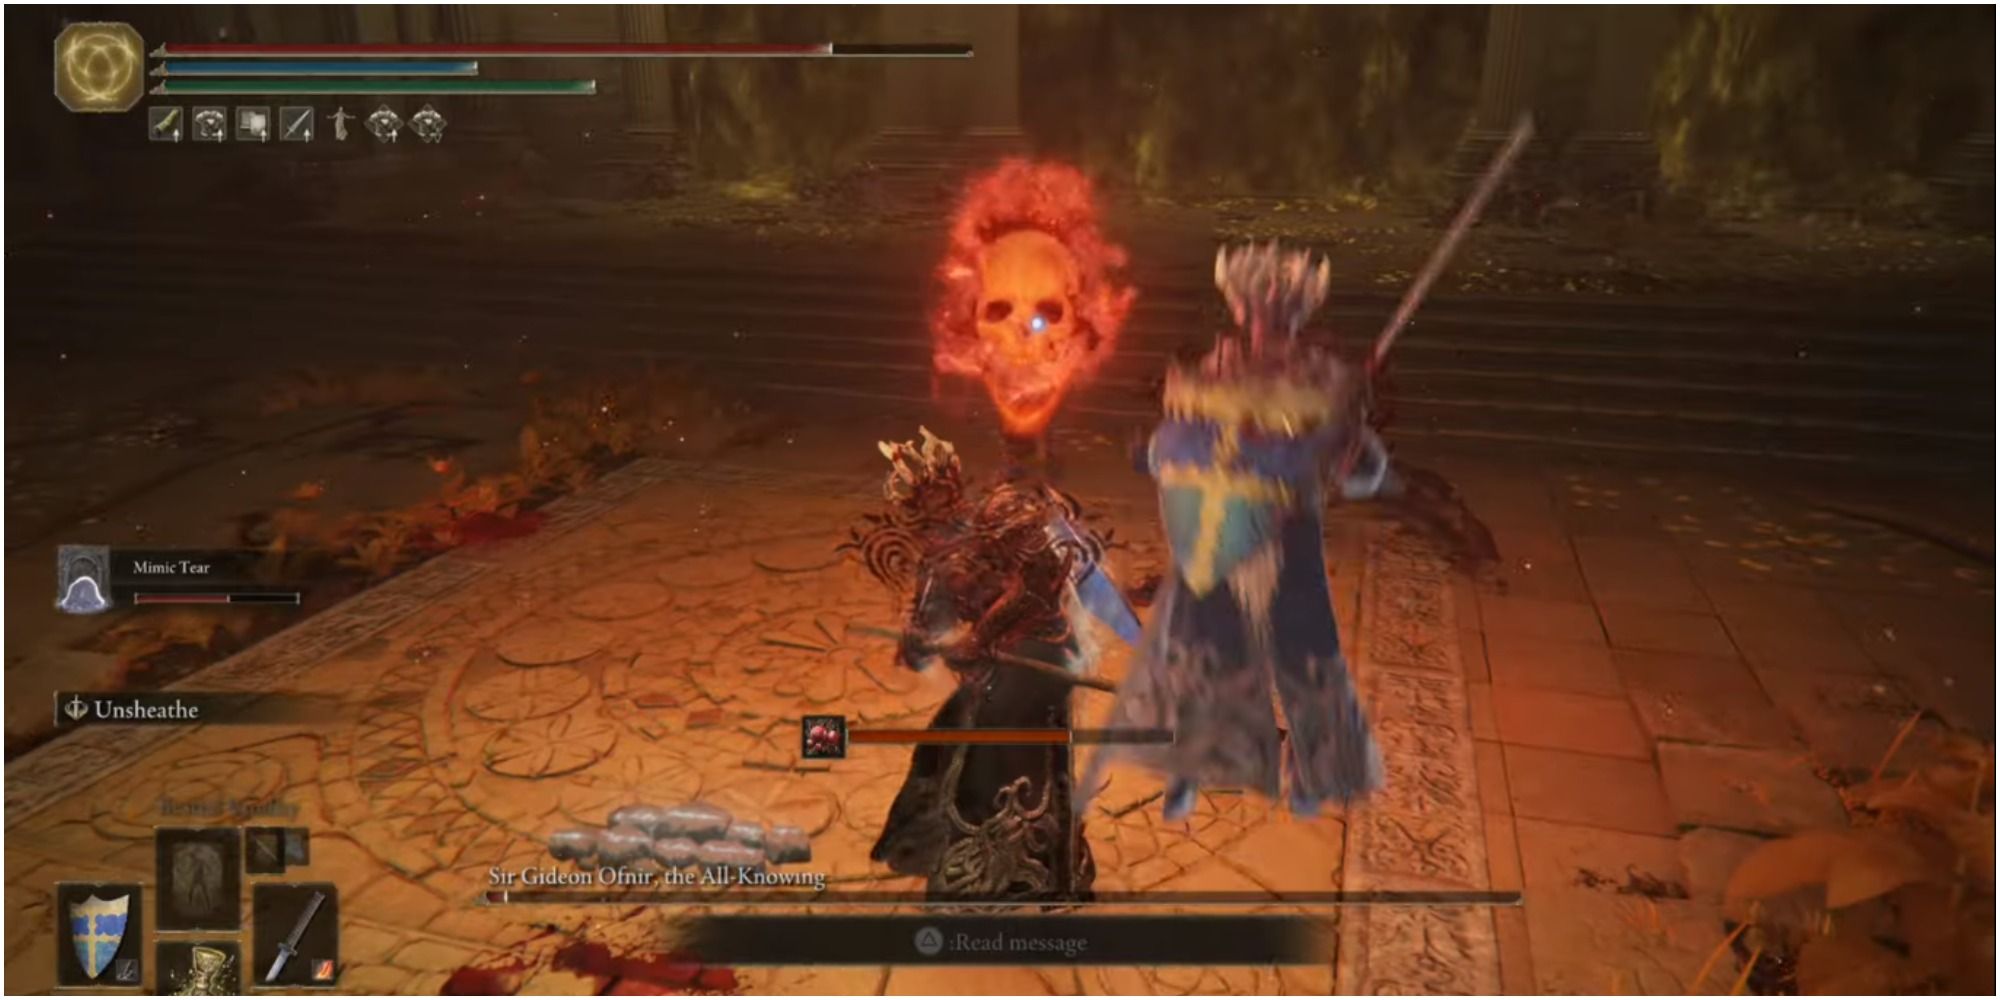 The boss summoning a red floating skull at the player.